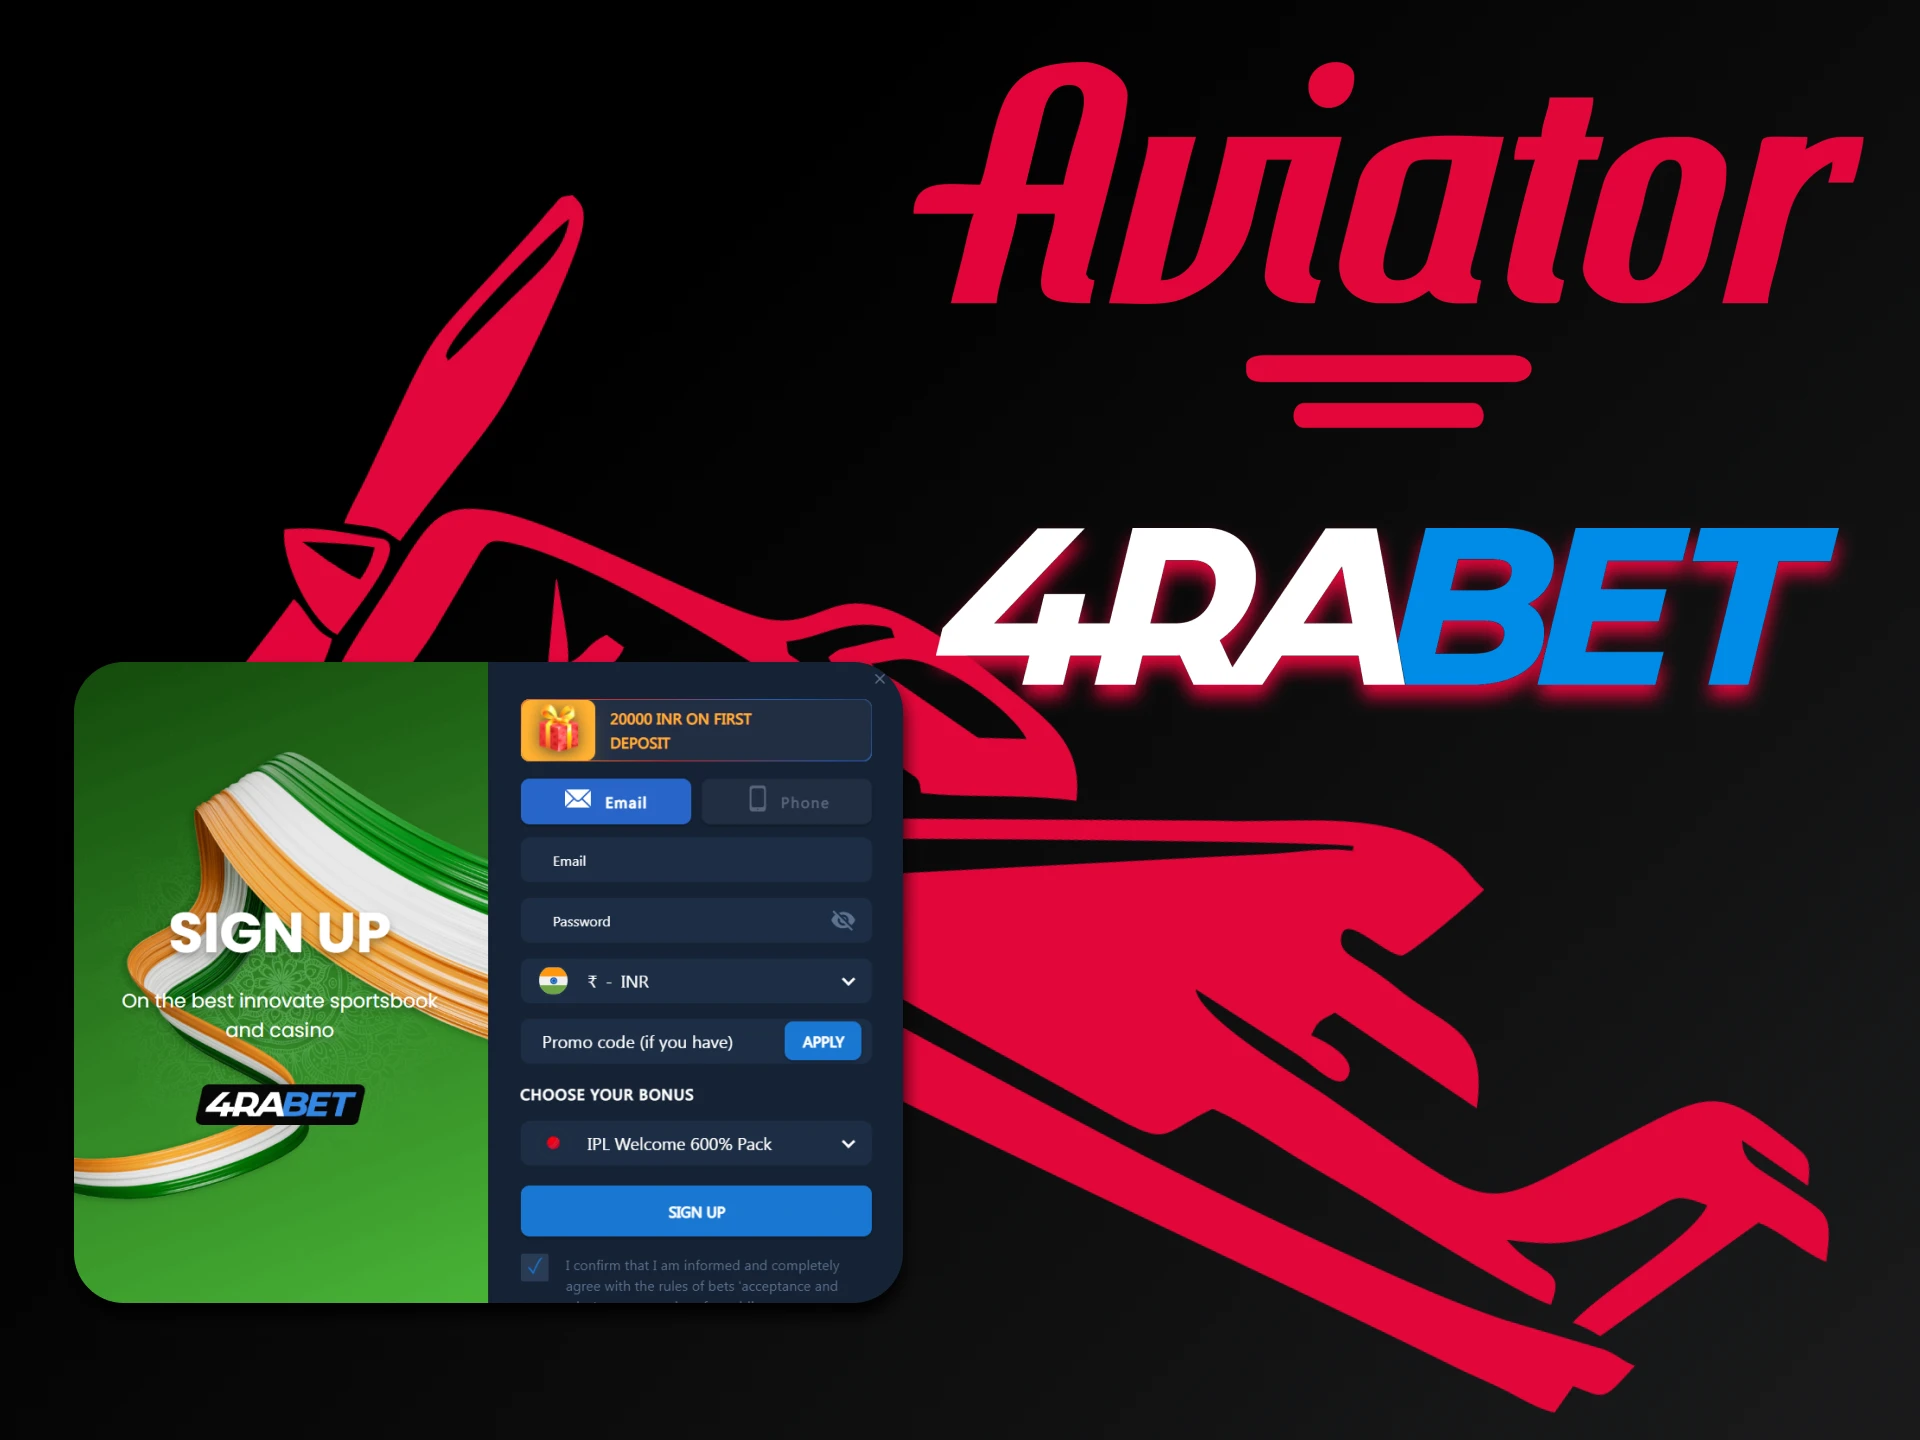 Create a personal account on 4rabet to play Aviator.